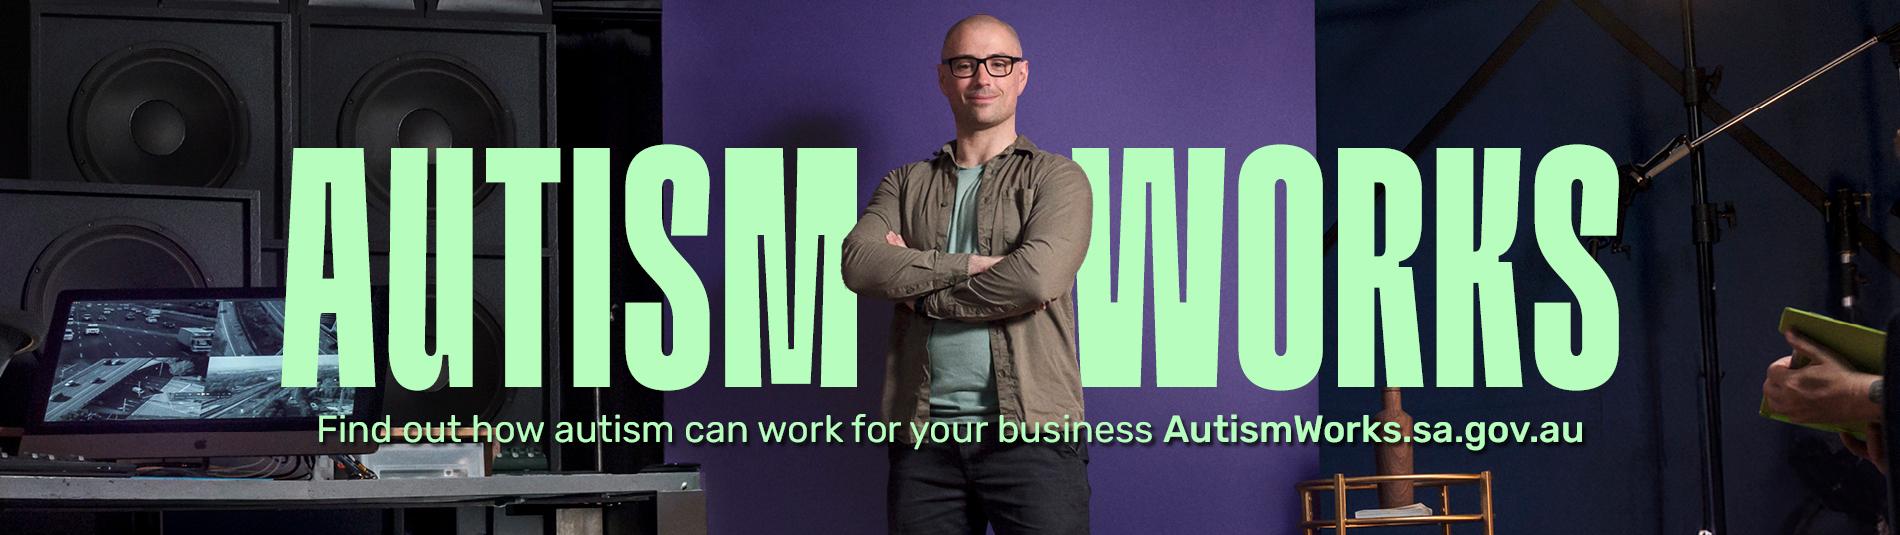 Autism Works - Find out how autism can work for your business autismworks.sa.gov.au